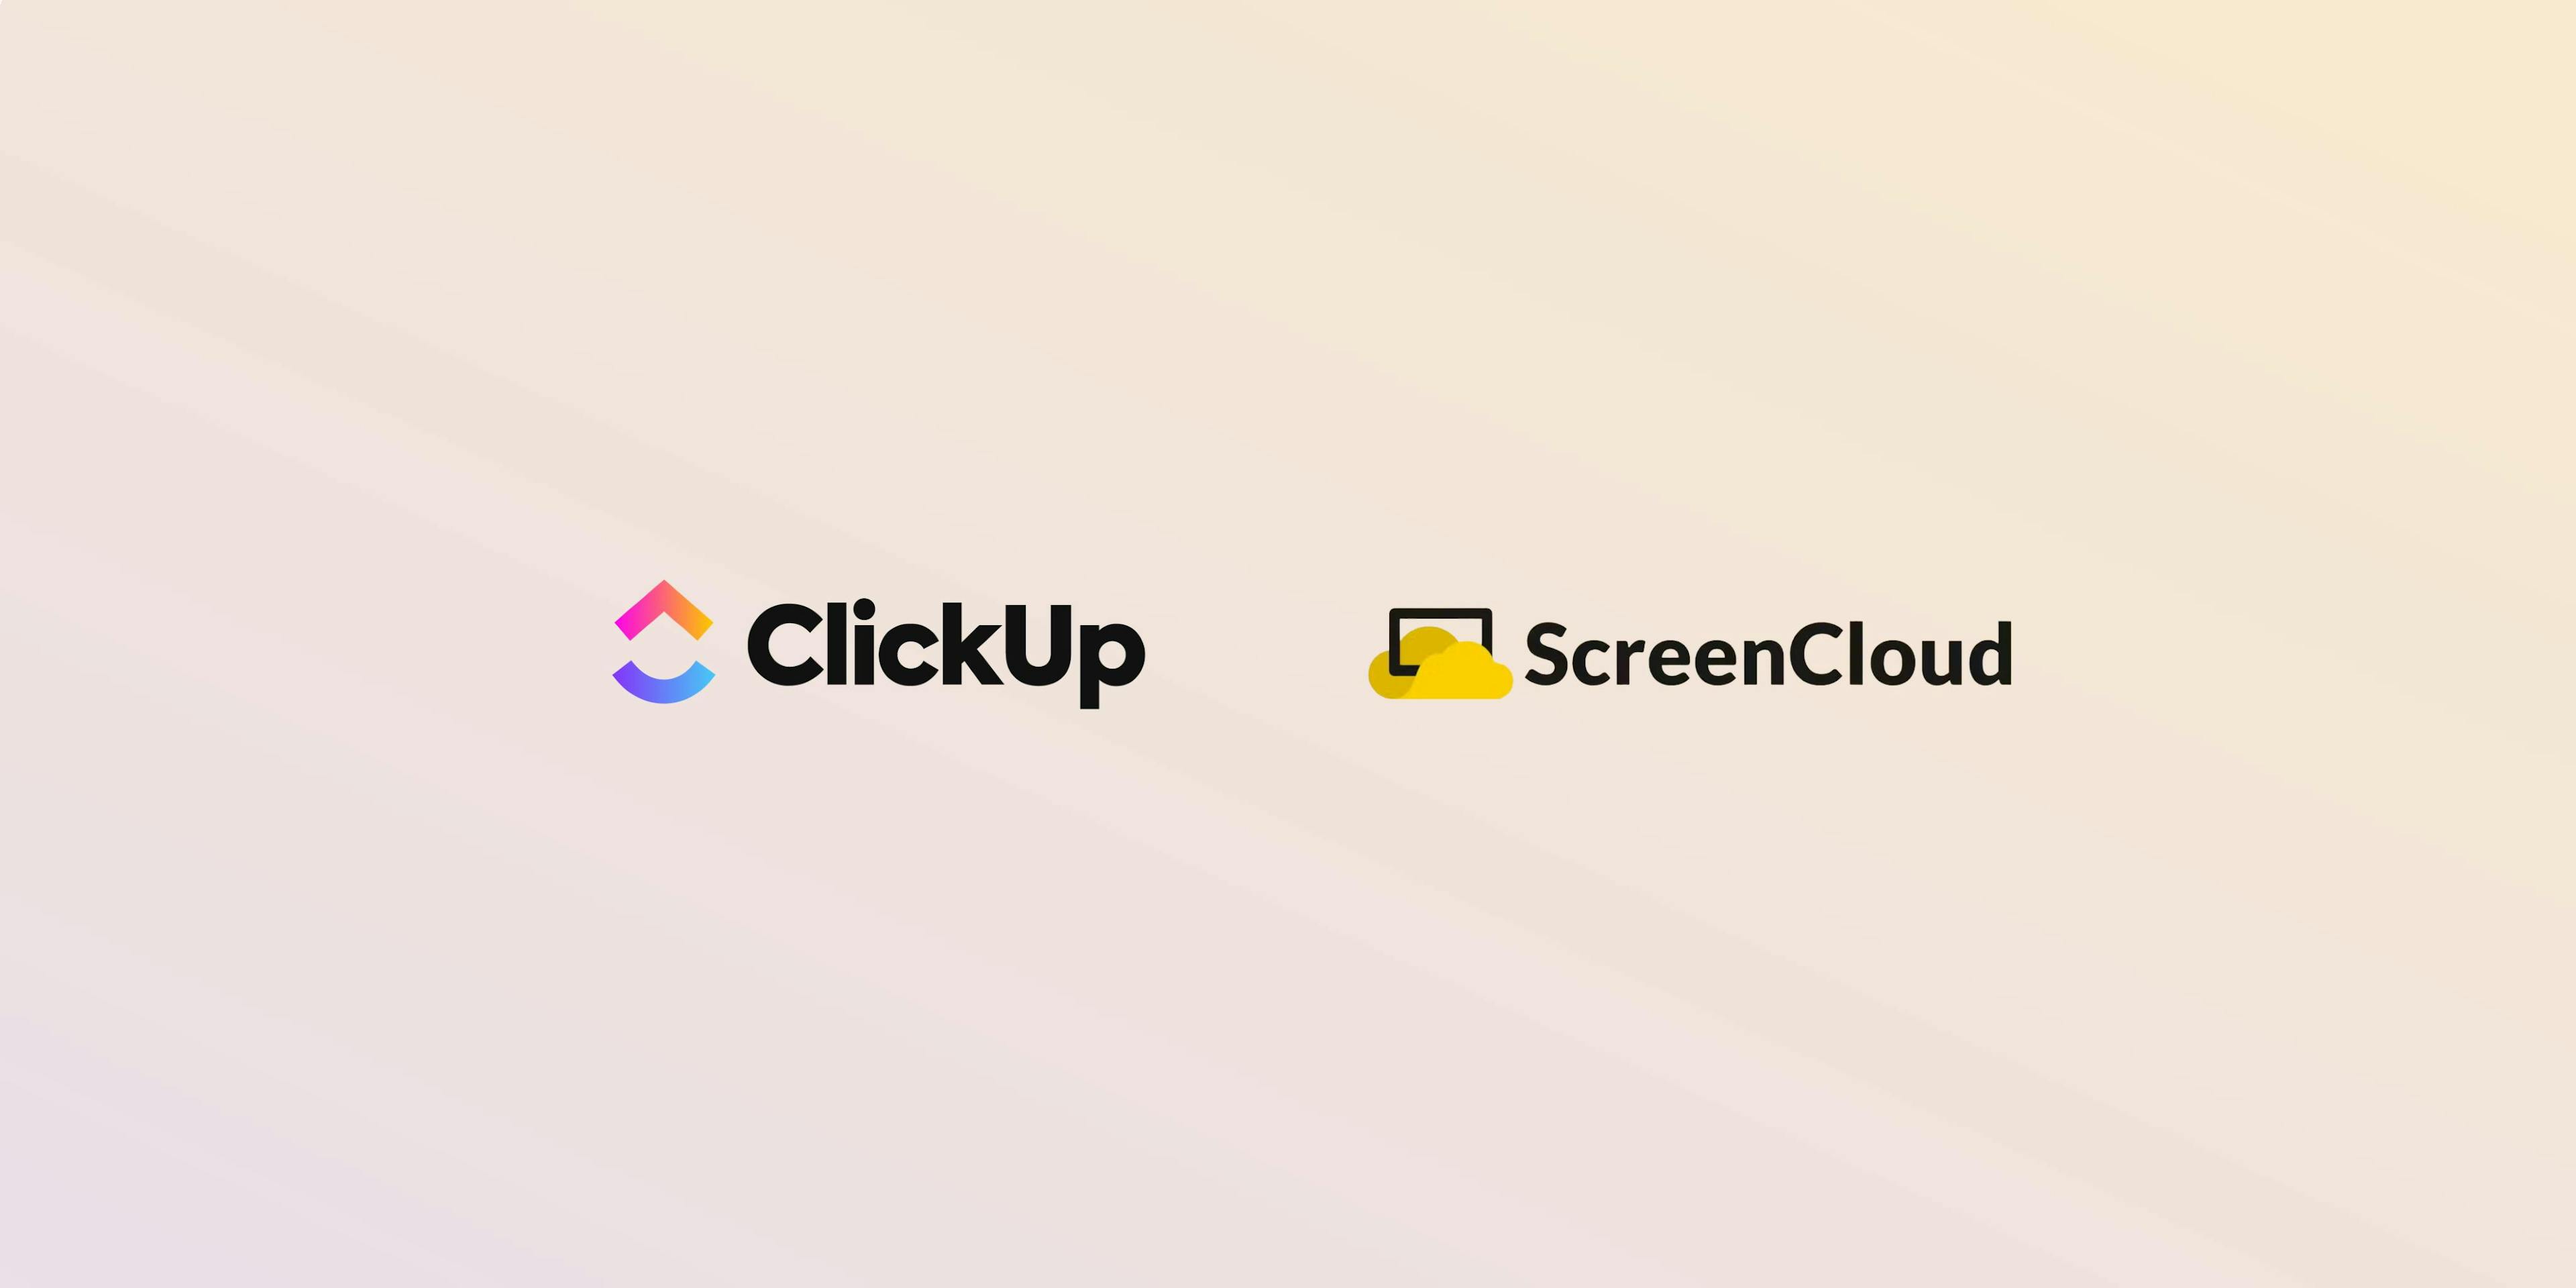 ScreenCloud Article - Build a ClickUp dashboard and cast it to a TV everyone can see